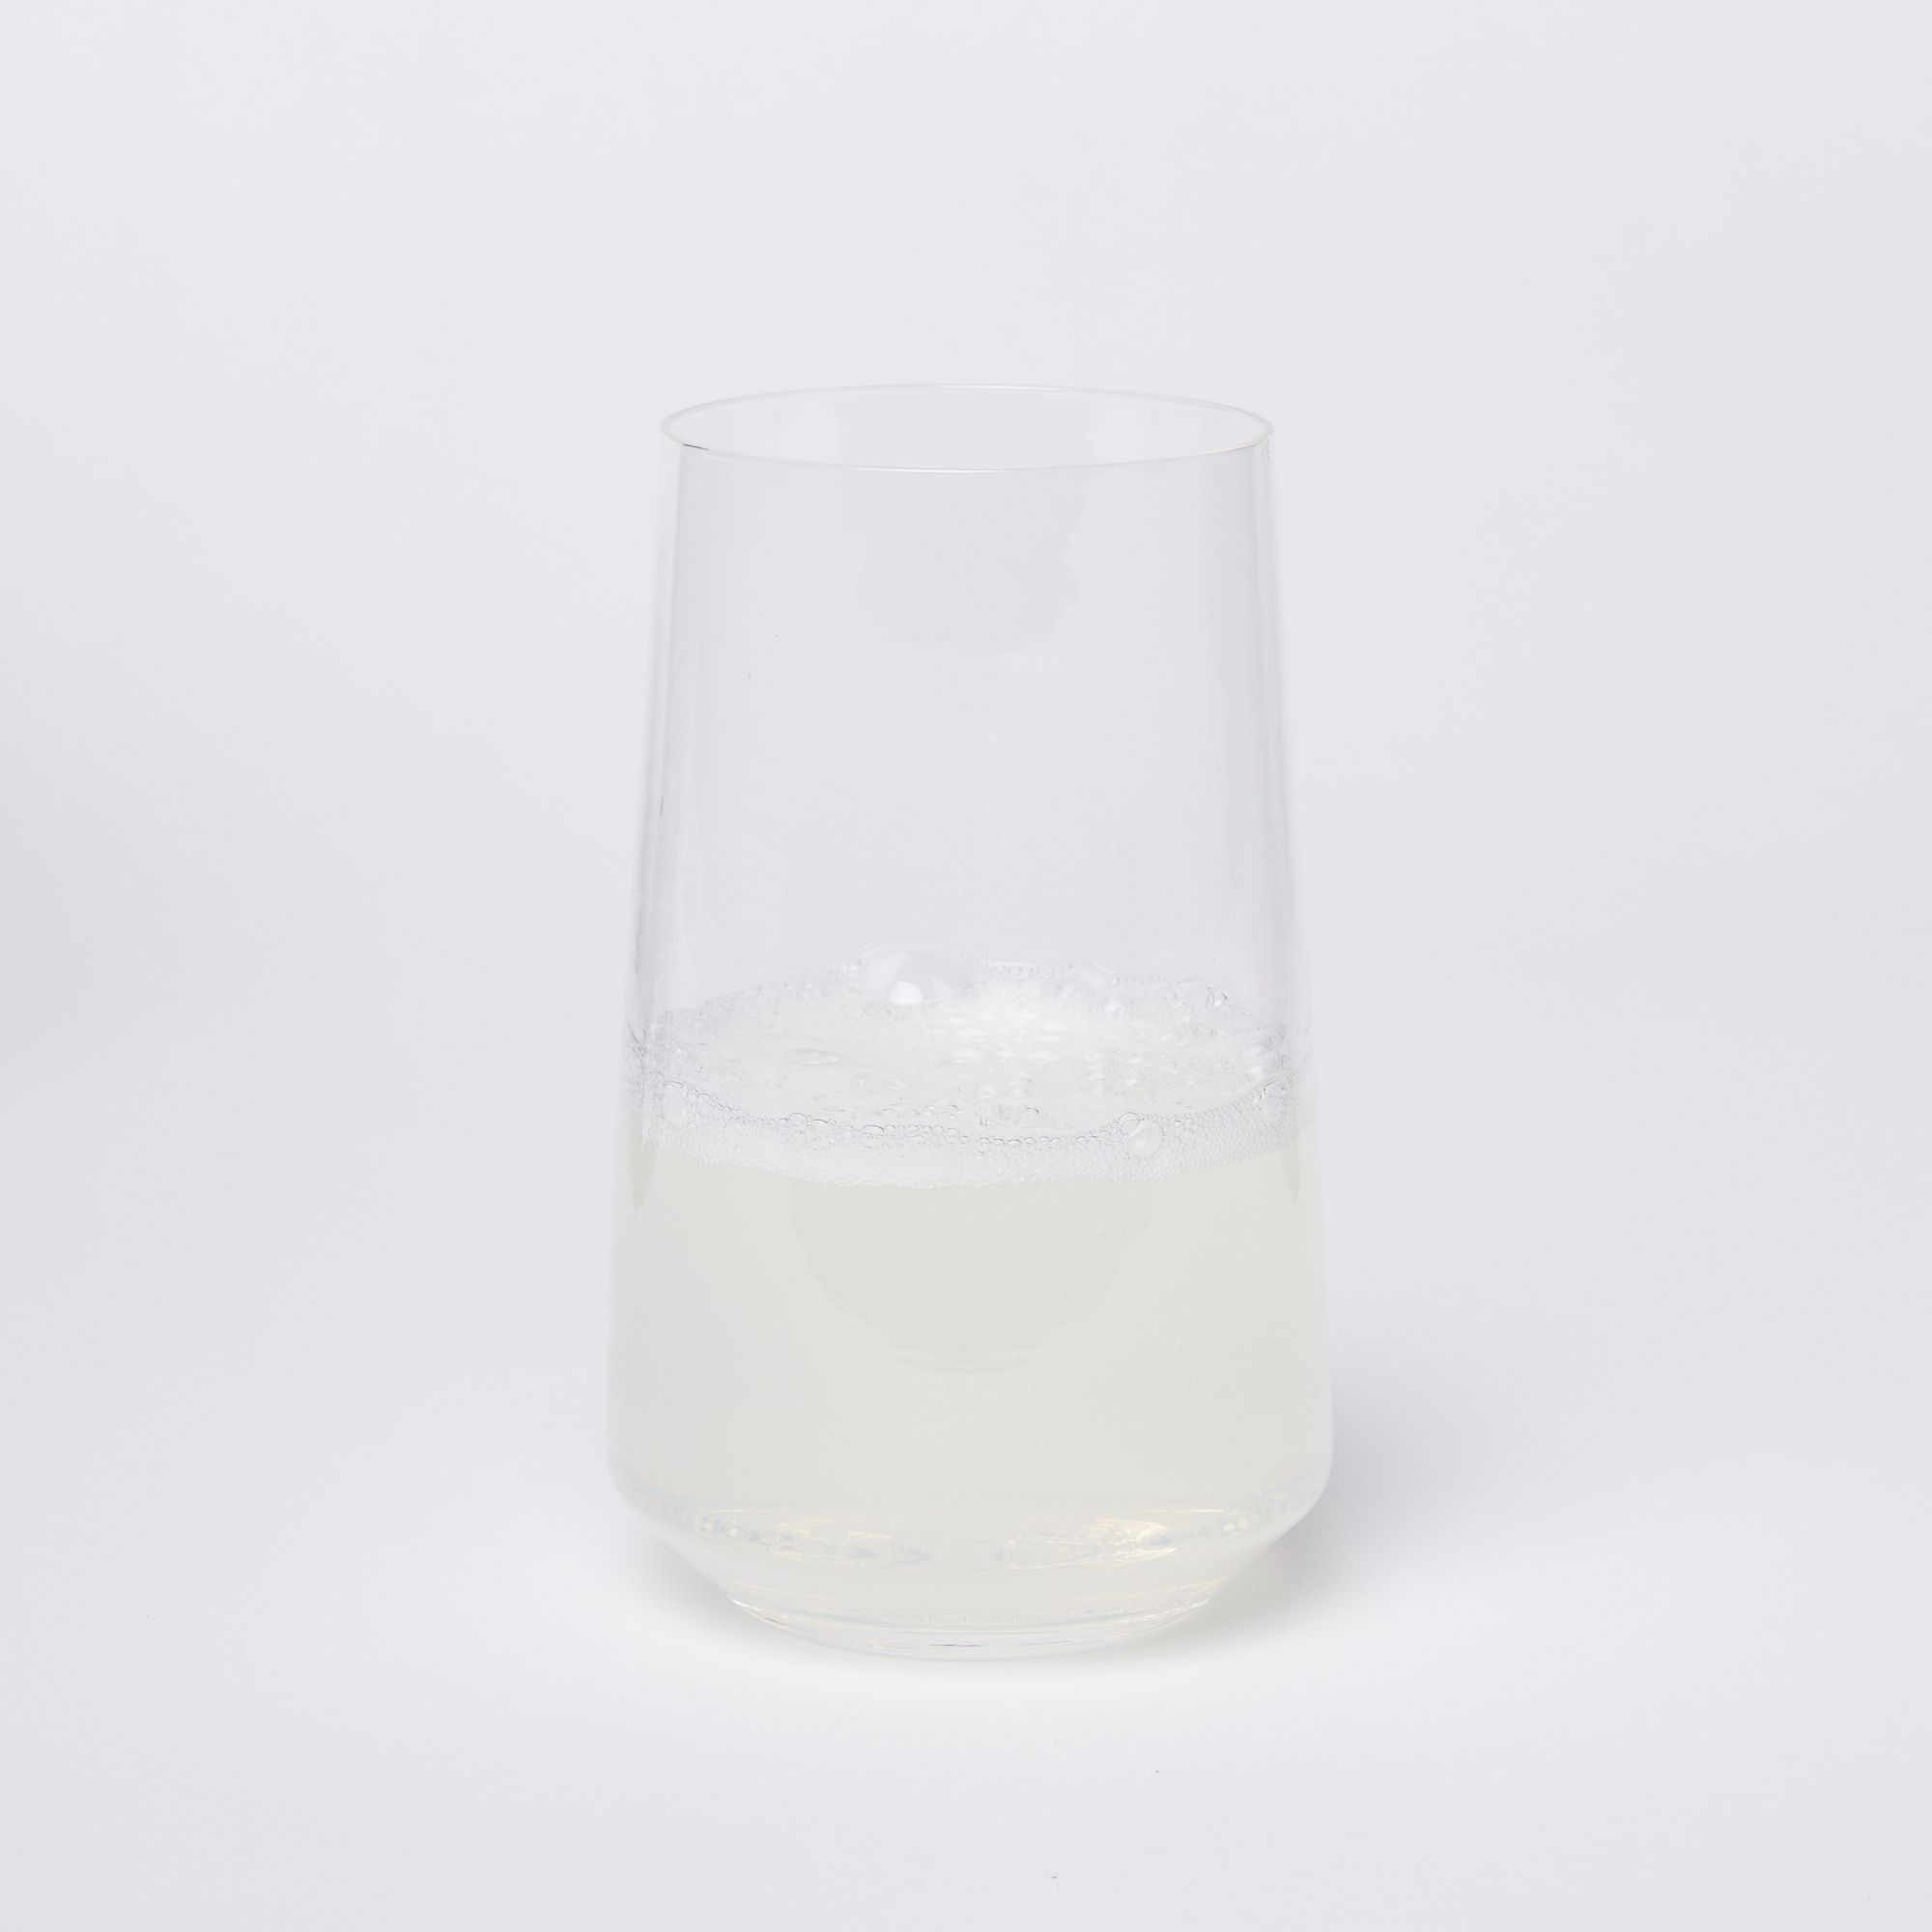 A clear round glass half full of a semi-opaque beverage